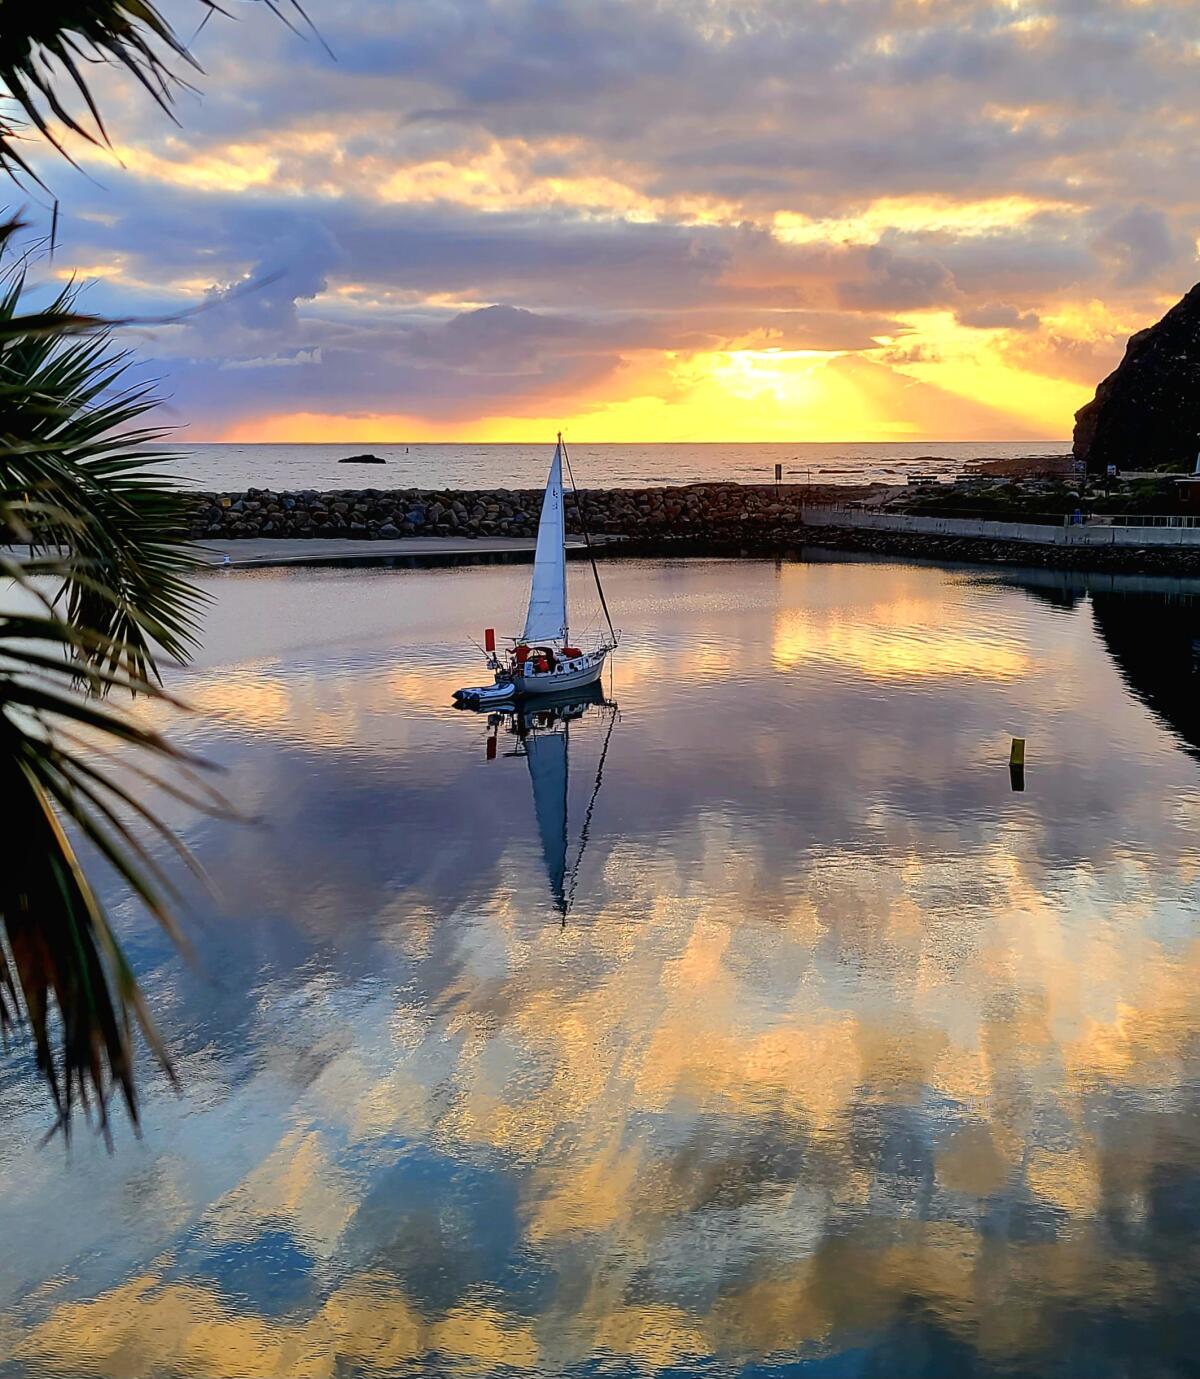 A small boat is seen in a lagoon that reflects the sunset.